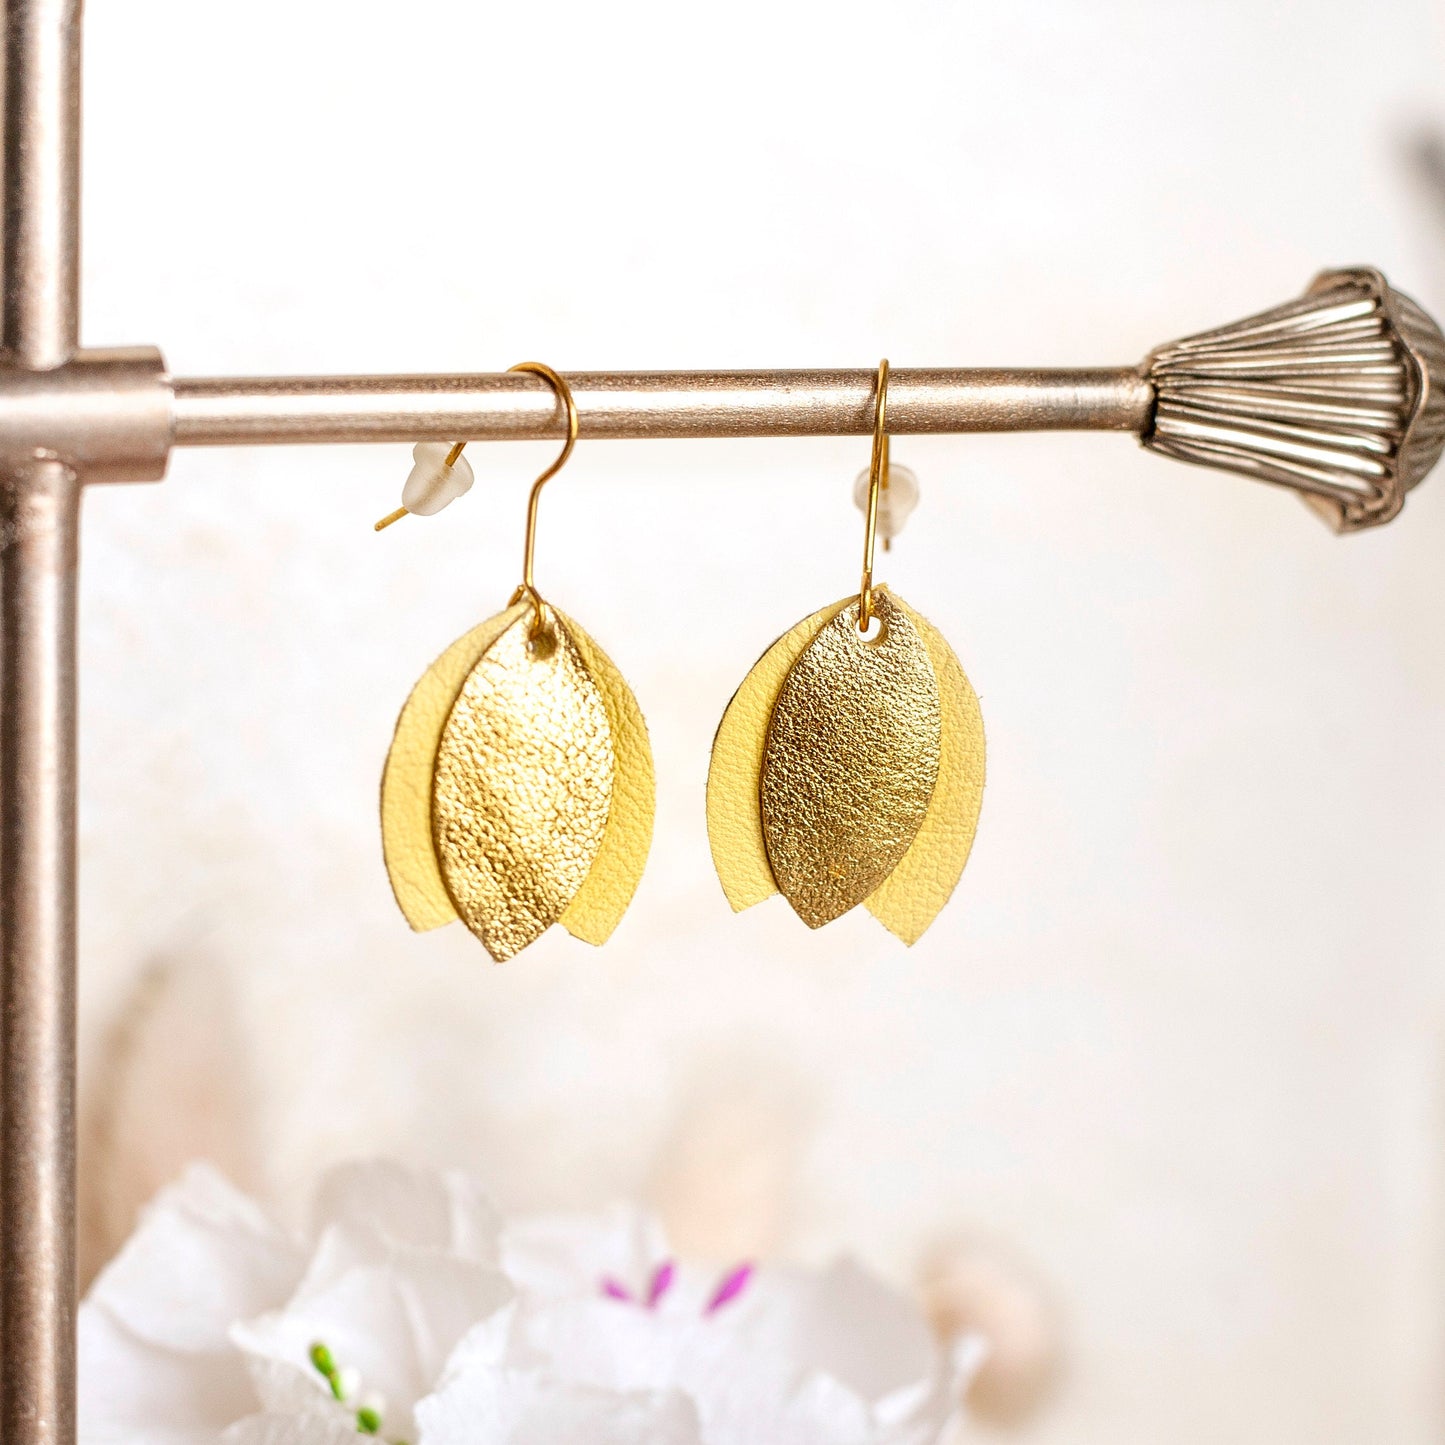 Gold and yellow leather tulip earrings